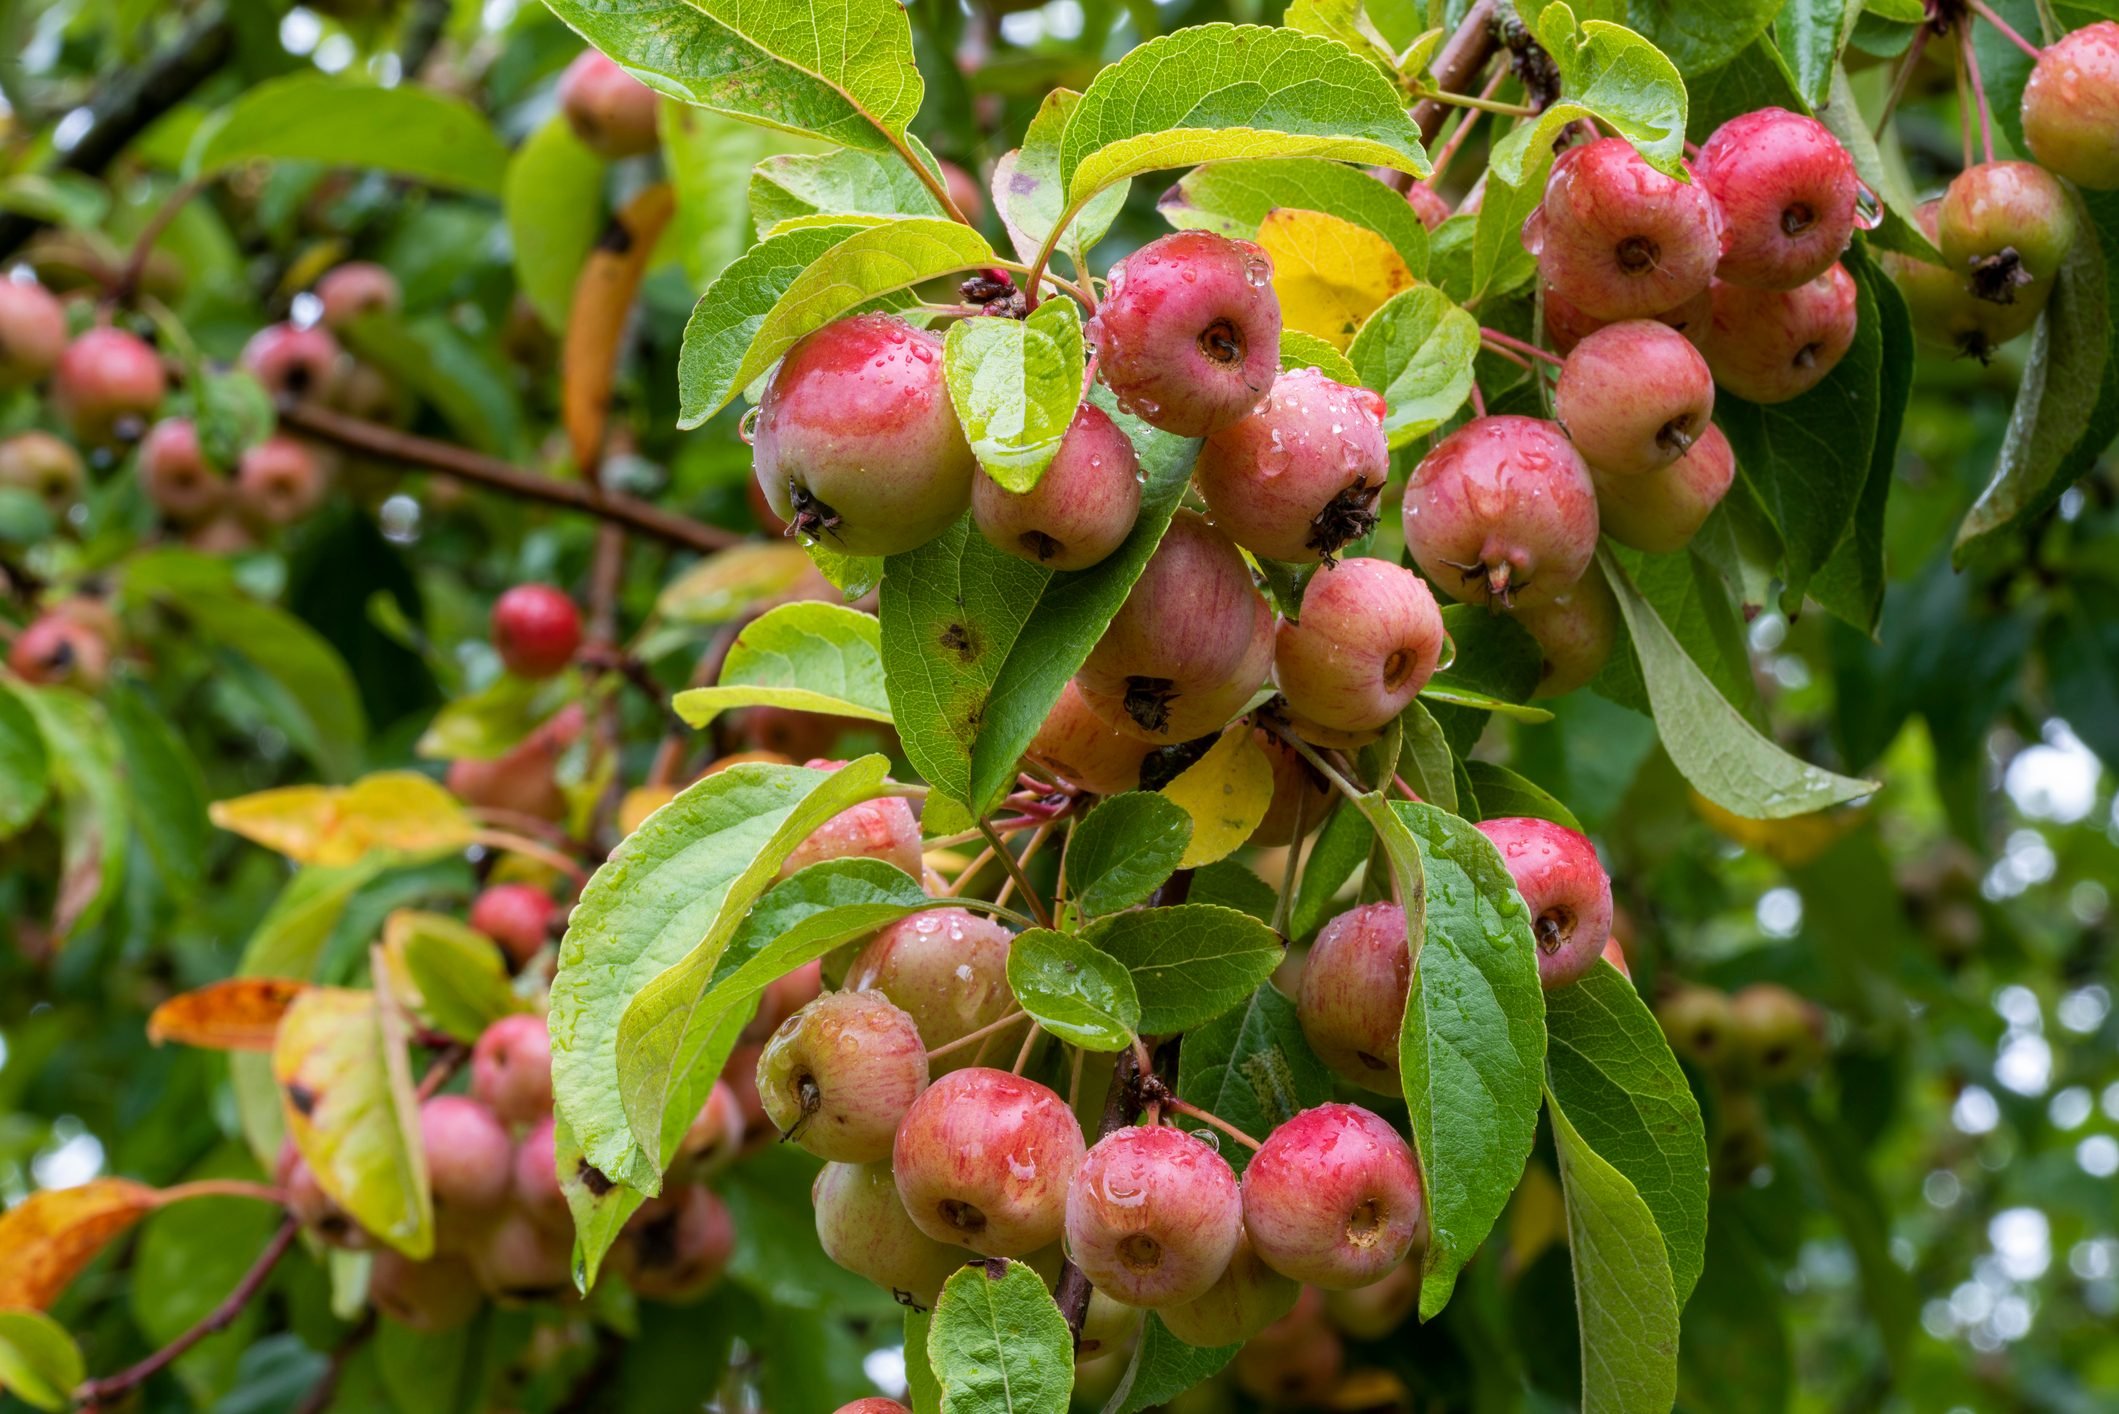 <p>Crabapples are good for medium to smaller yards because their roots aren't too invasive and the trees only grow 10 to 20 feet tall.</p> <p>Their pink <a href="https://www.familyhandyman.com/list/flowering-trees/" rel="noopener noreferrer">springtime blooms</a> make humans cheery while also supporting bees, butterflies and other pollinators. Crabapple trees also provide nesting space and shelter for birds and small animals, and their fruit is a good food source for birds.</p> <p>Some crabapple species came from Europe, but at least three are native, keystone species: sweet crabapple in the Northern forests; prairie crabapple in the Great Plains; and Oregon crabapple in the Northwest. But even if you have a non-native crabapple, it's still a worthy habitat.</p> <p>Plant crabapple in sunny locations with well-draining soil, and provide regular watering during their establishment period, says Ali.</p>